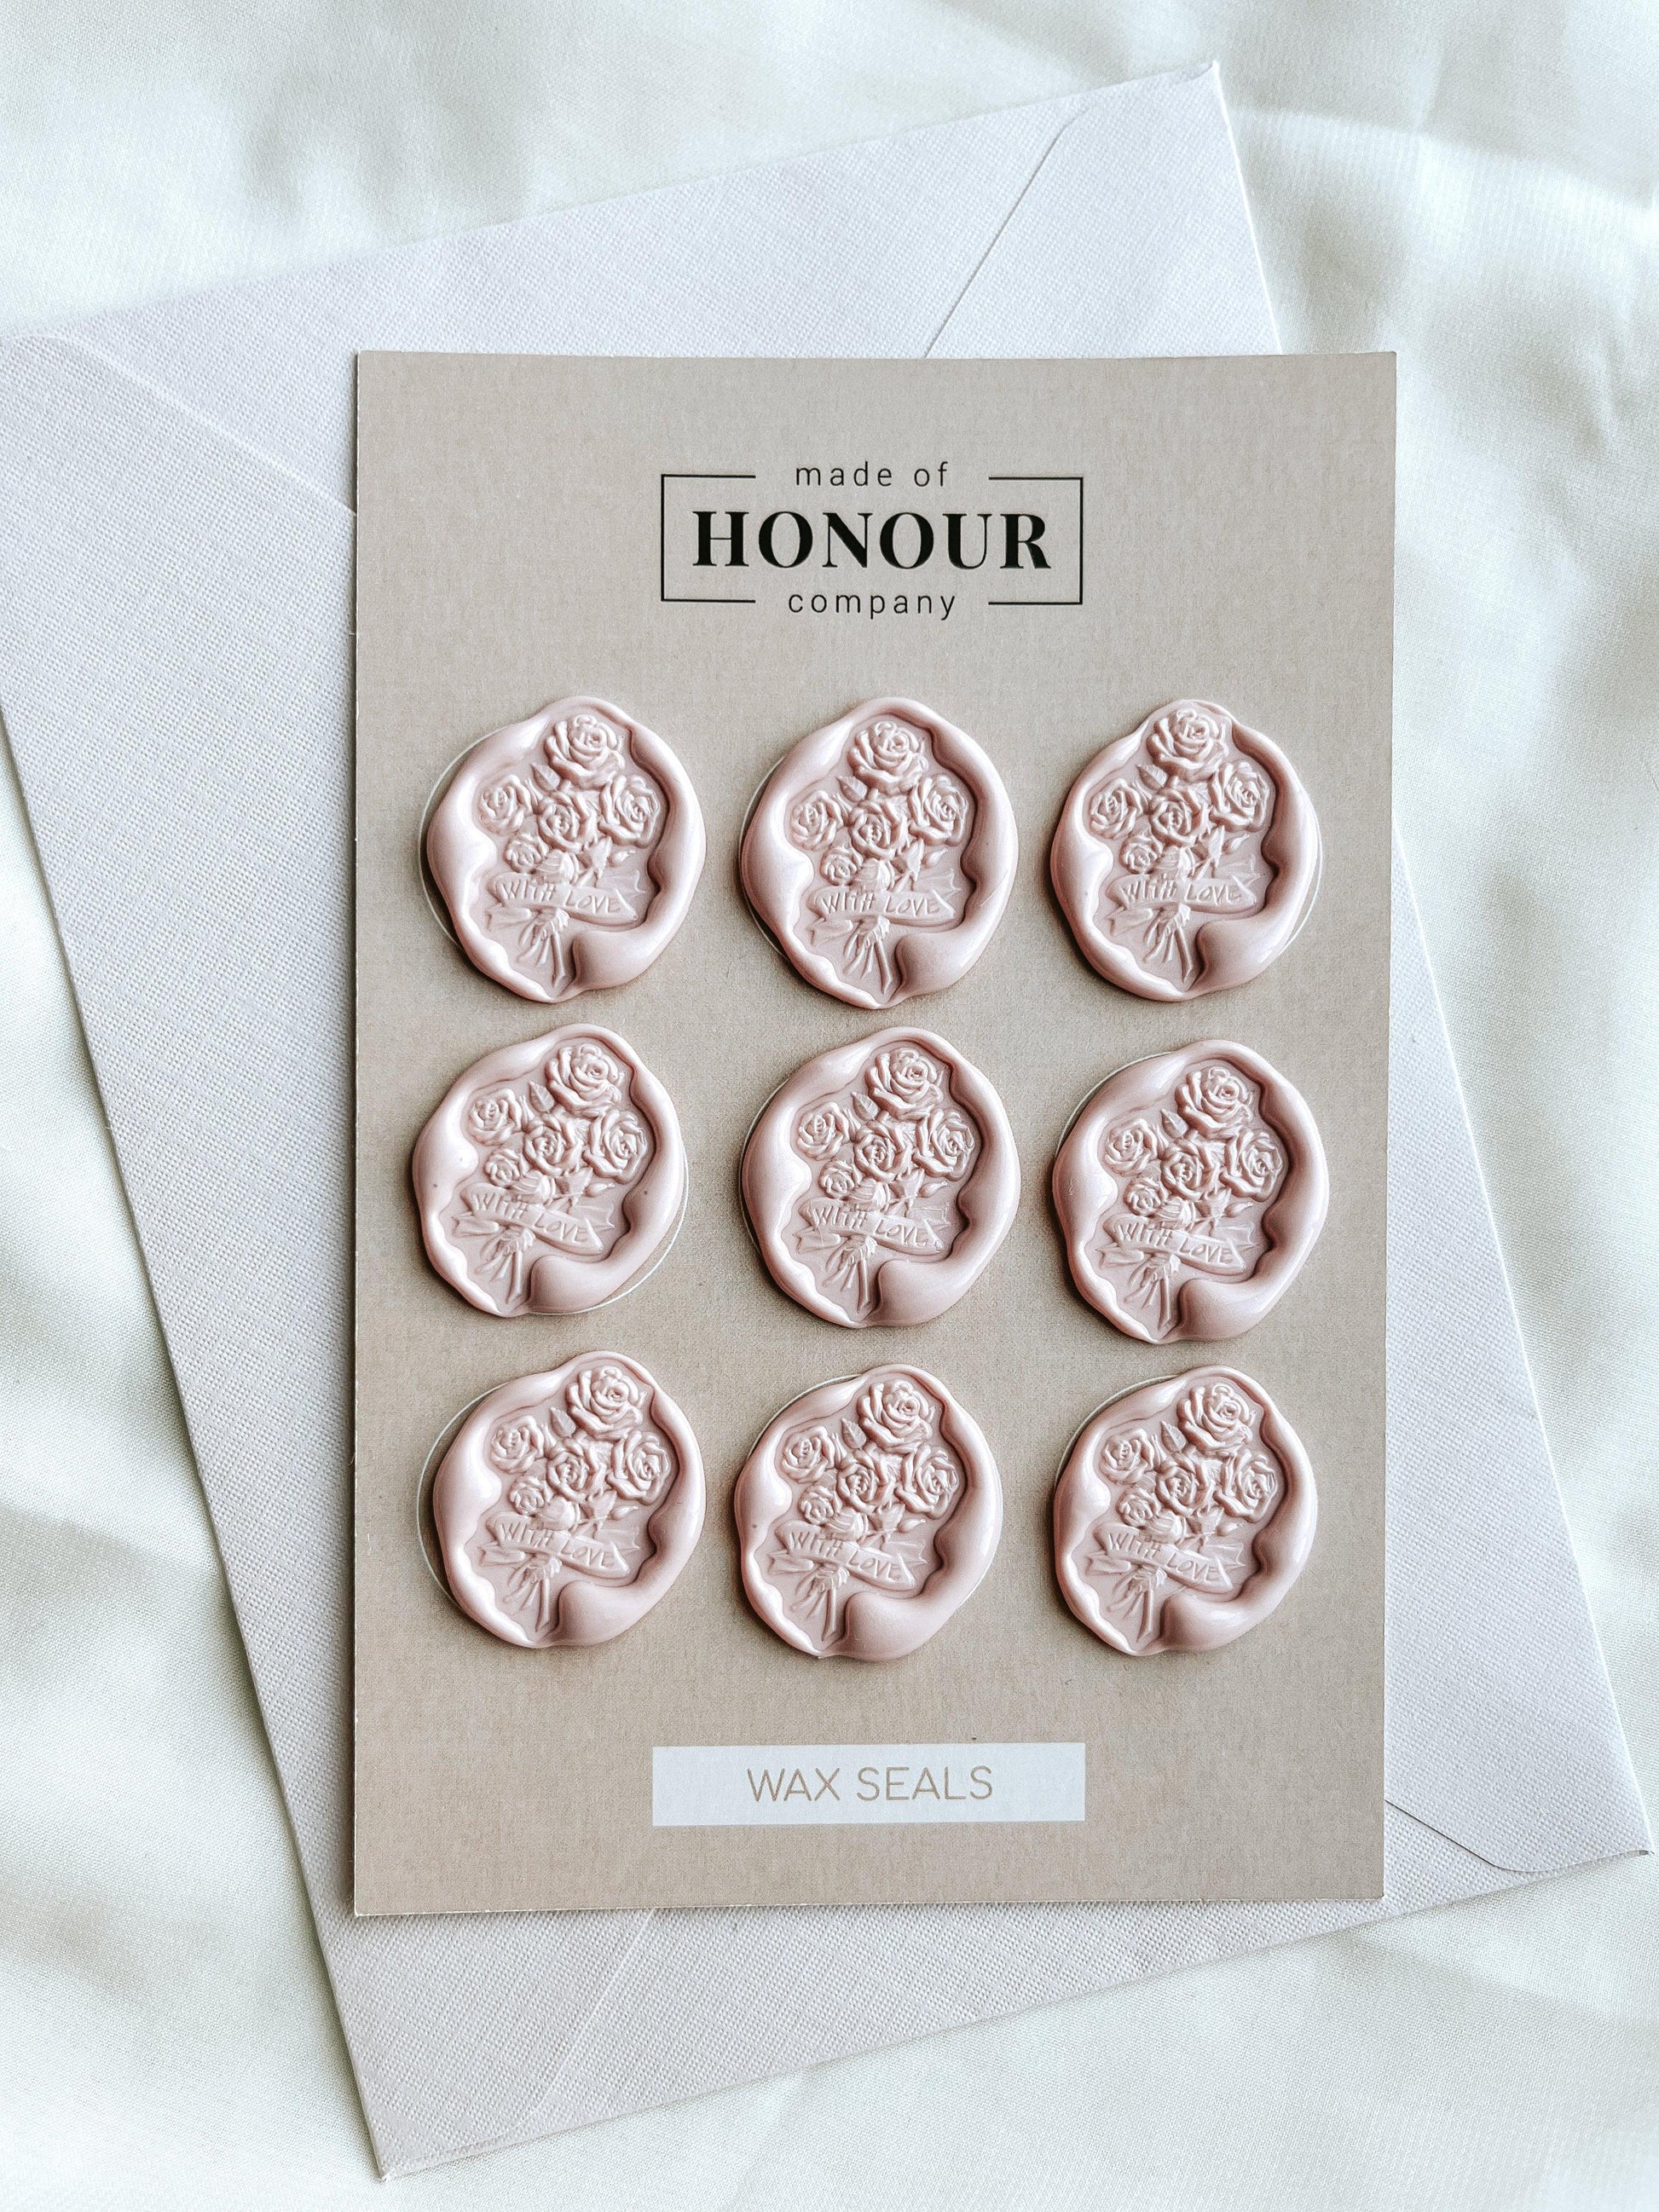 With Love Bouquet wax seals - Set of 9 - Made of Honour Co.